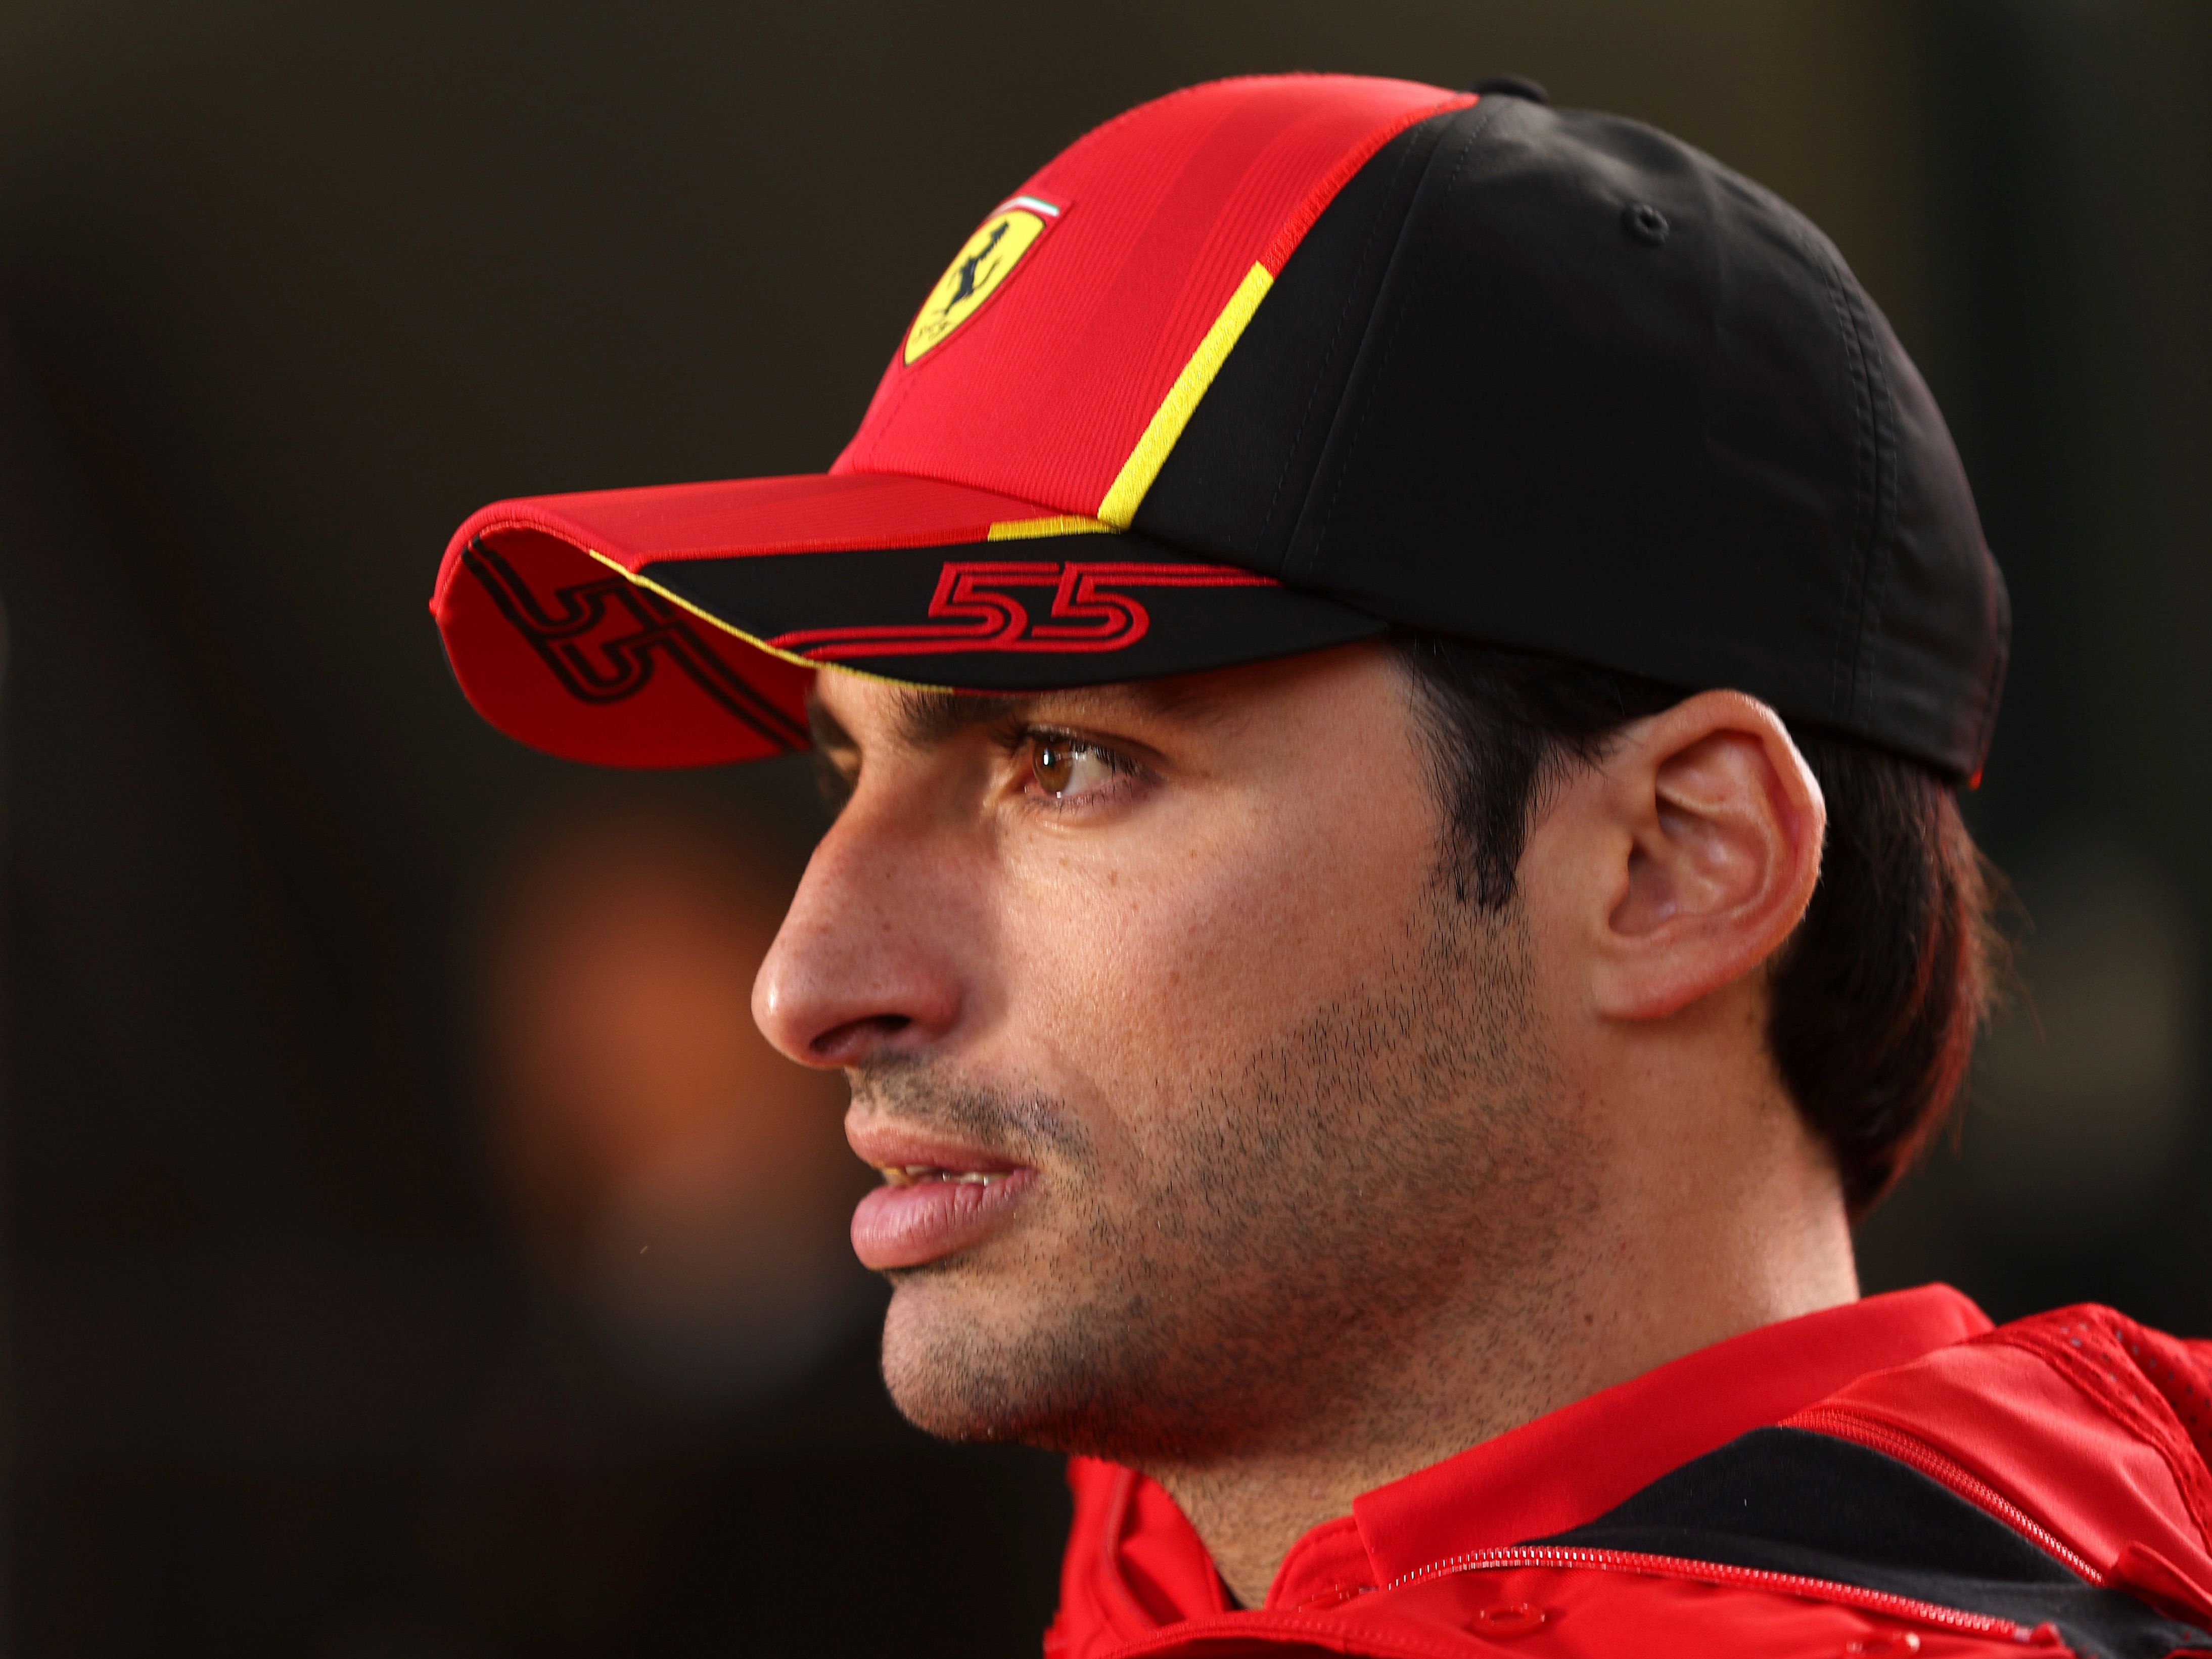 Carlos Sainz looks on in the paddock during previews ahead of the 2023 F1 Australian Grand Prix (Photo by Robert Cianflone/Getty Images)